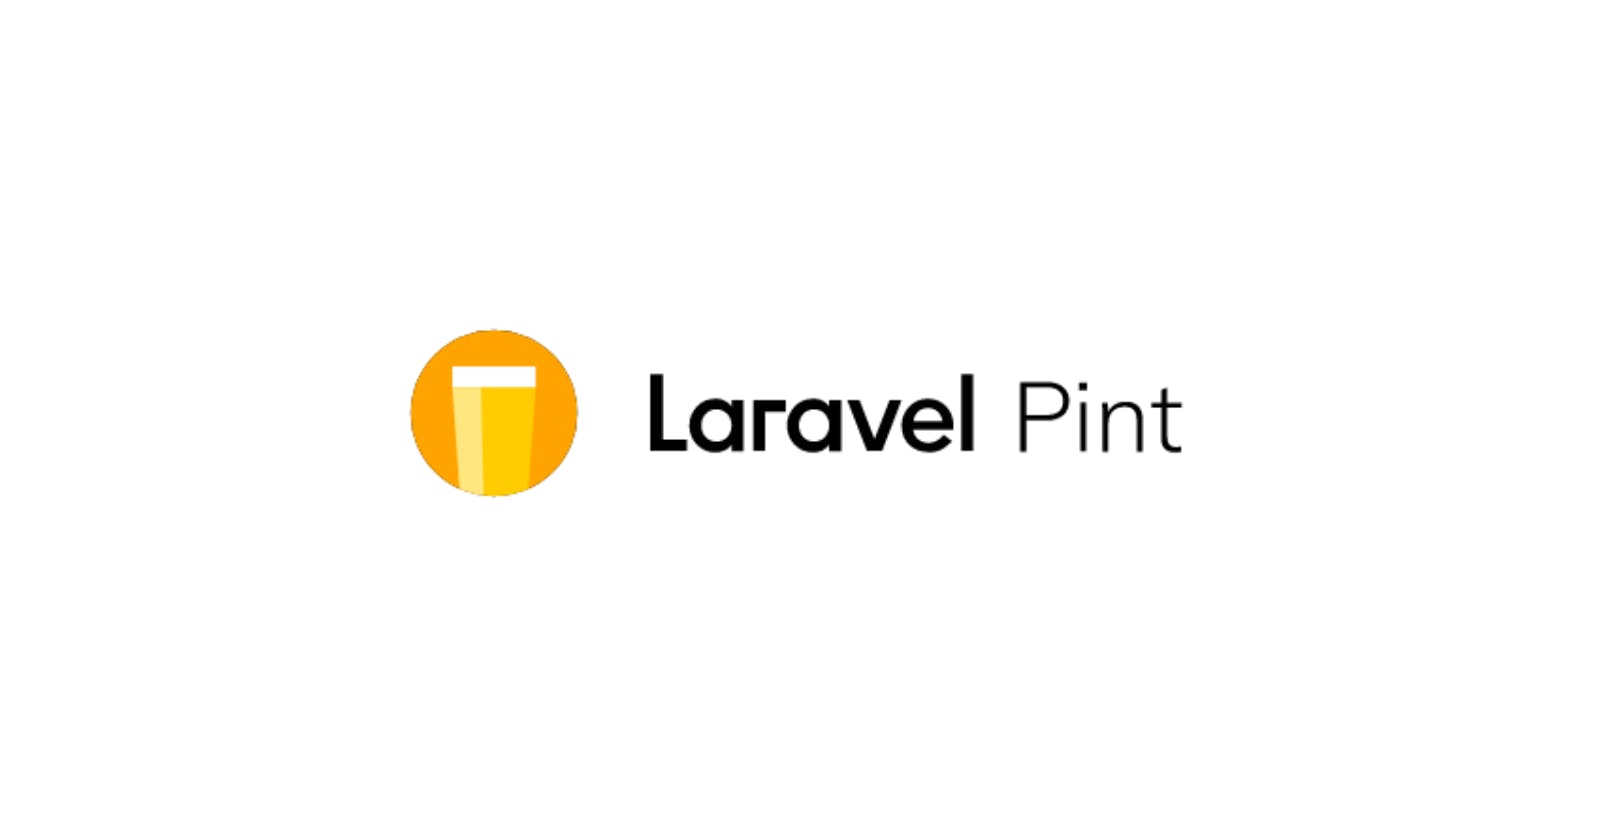 What Is "Laravel Pint" And Do I Need It As a Laravel Developer?